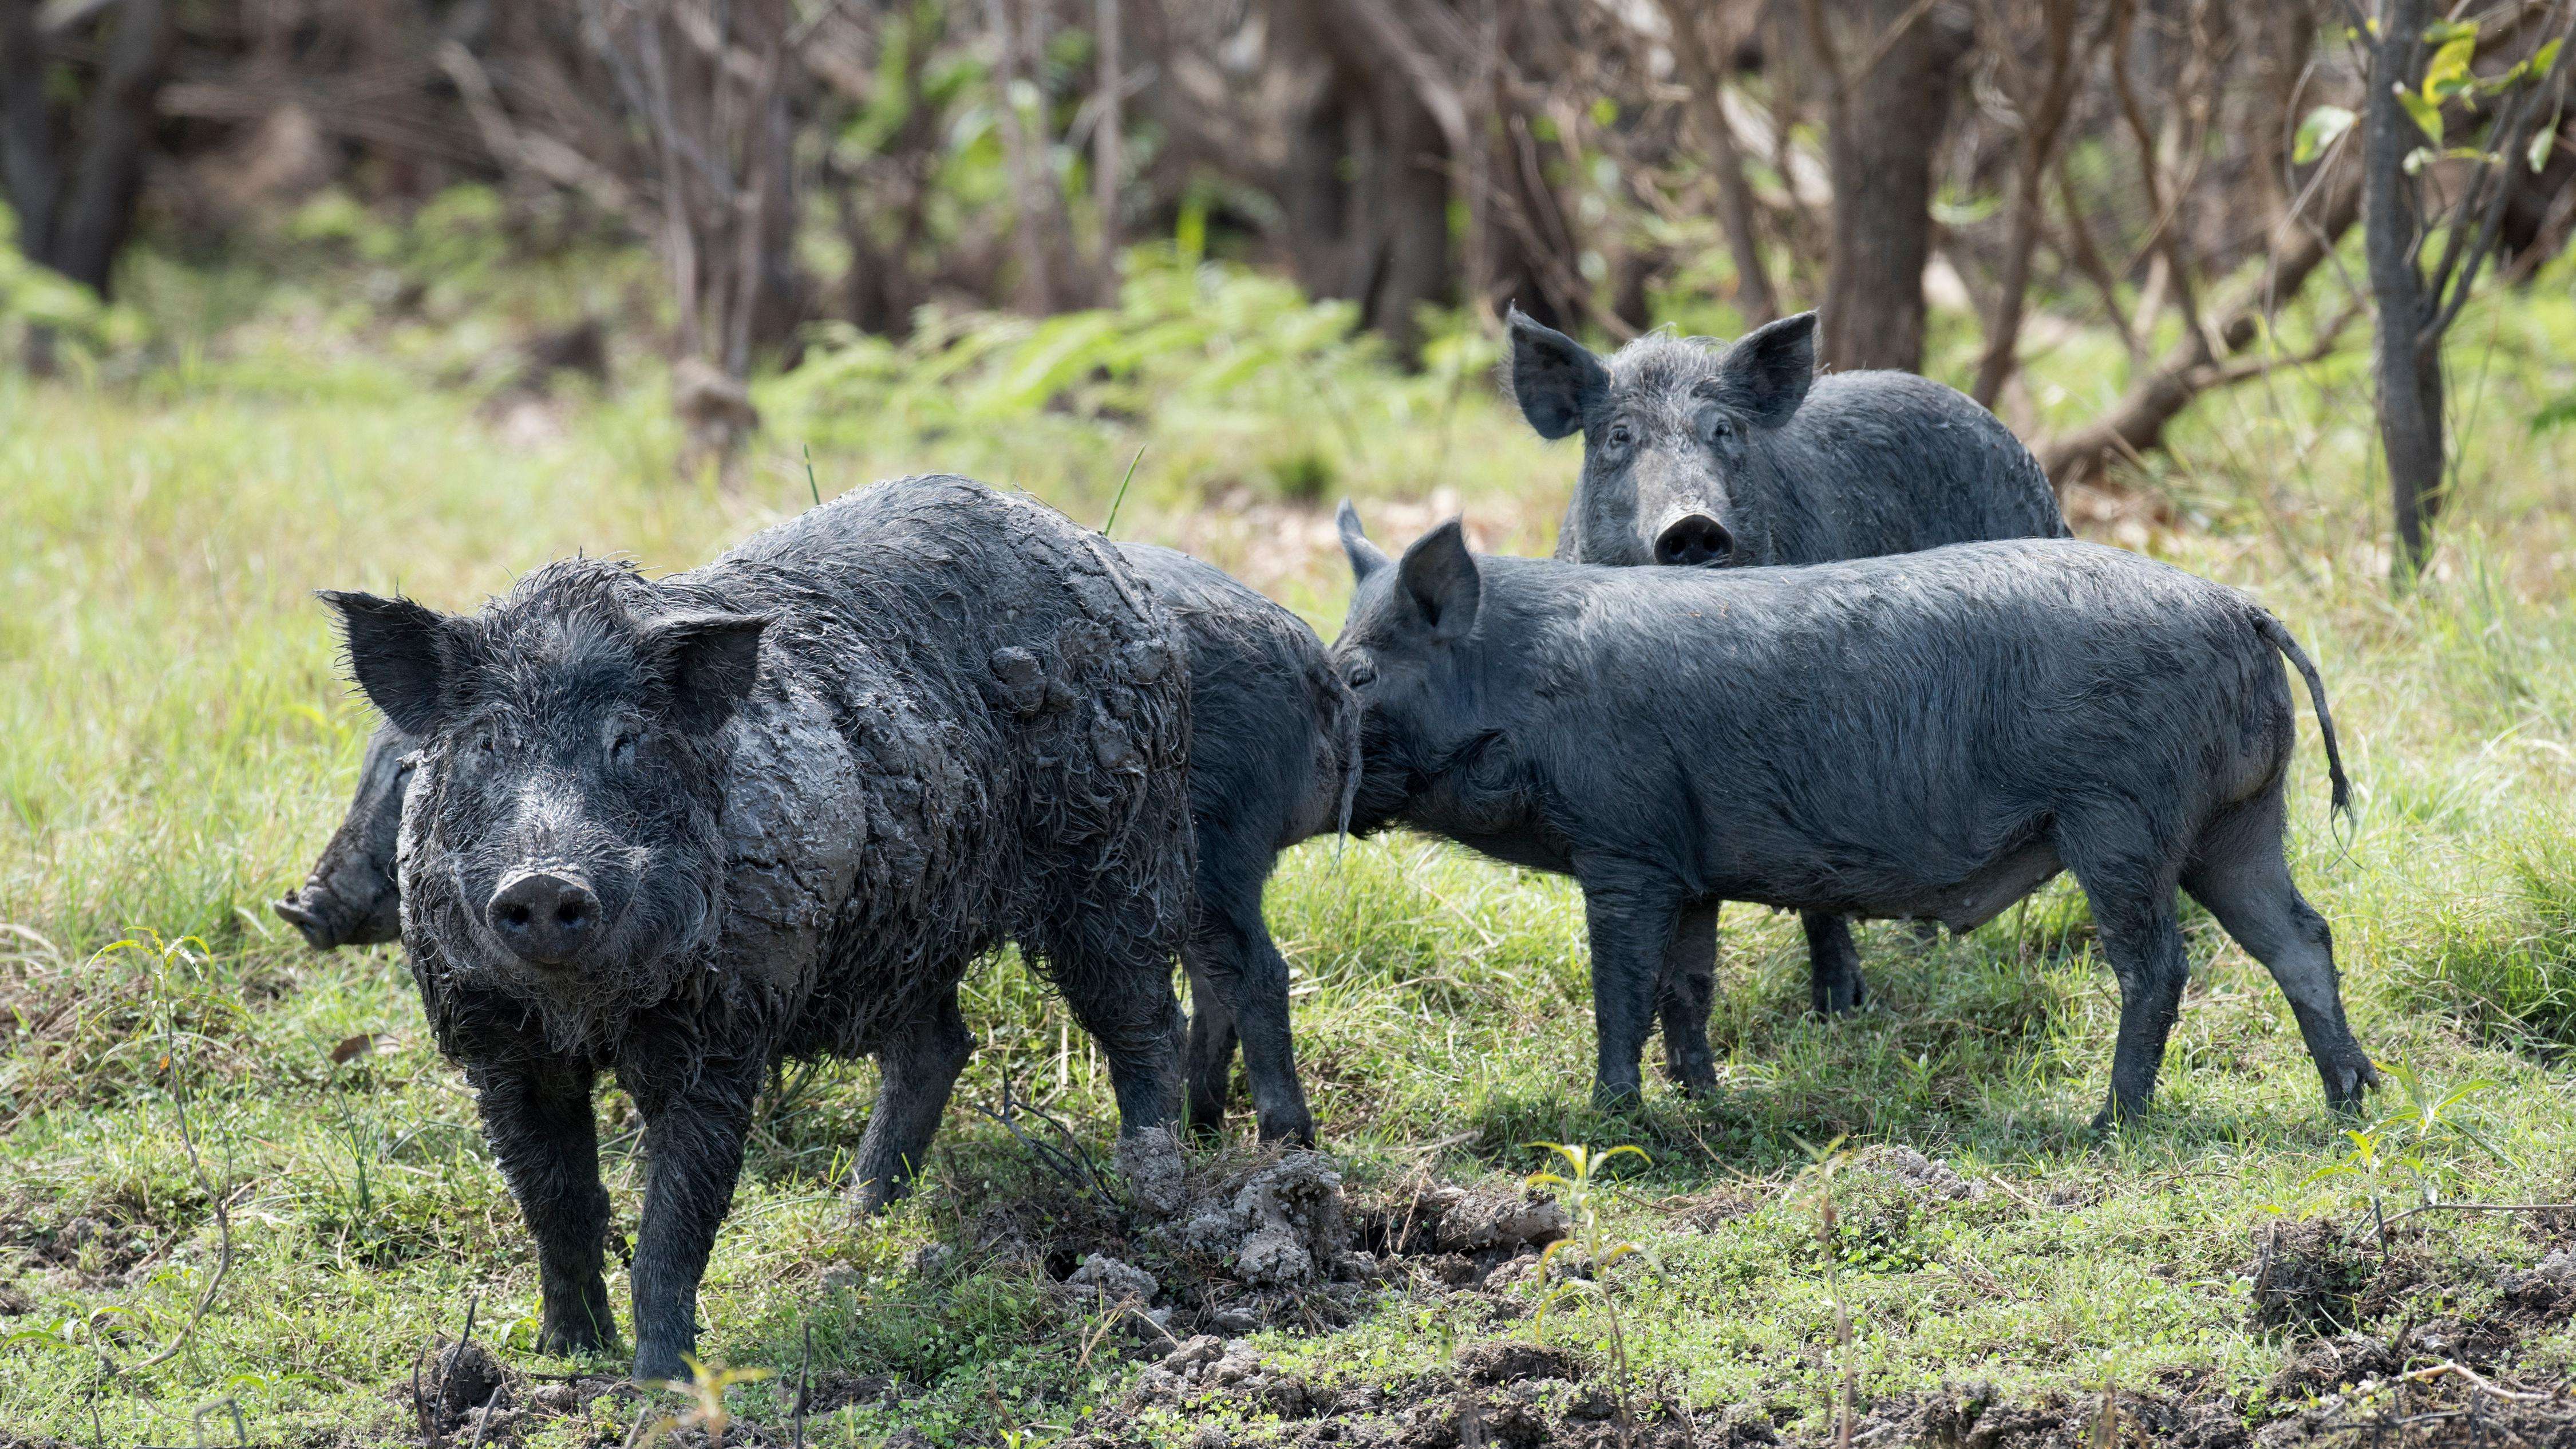 A group of black swine stand in front of a forest